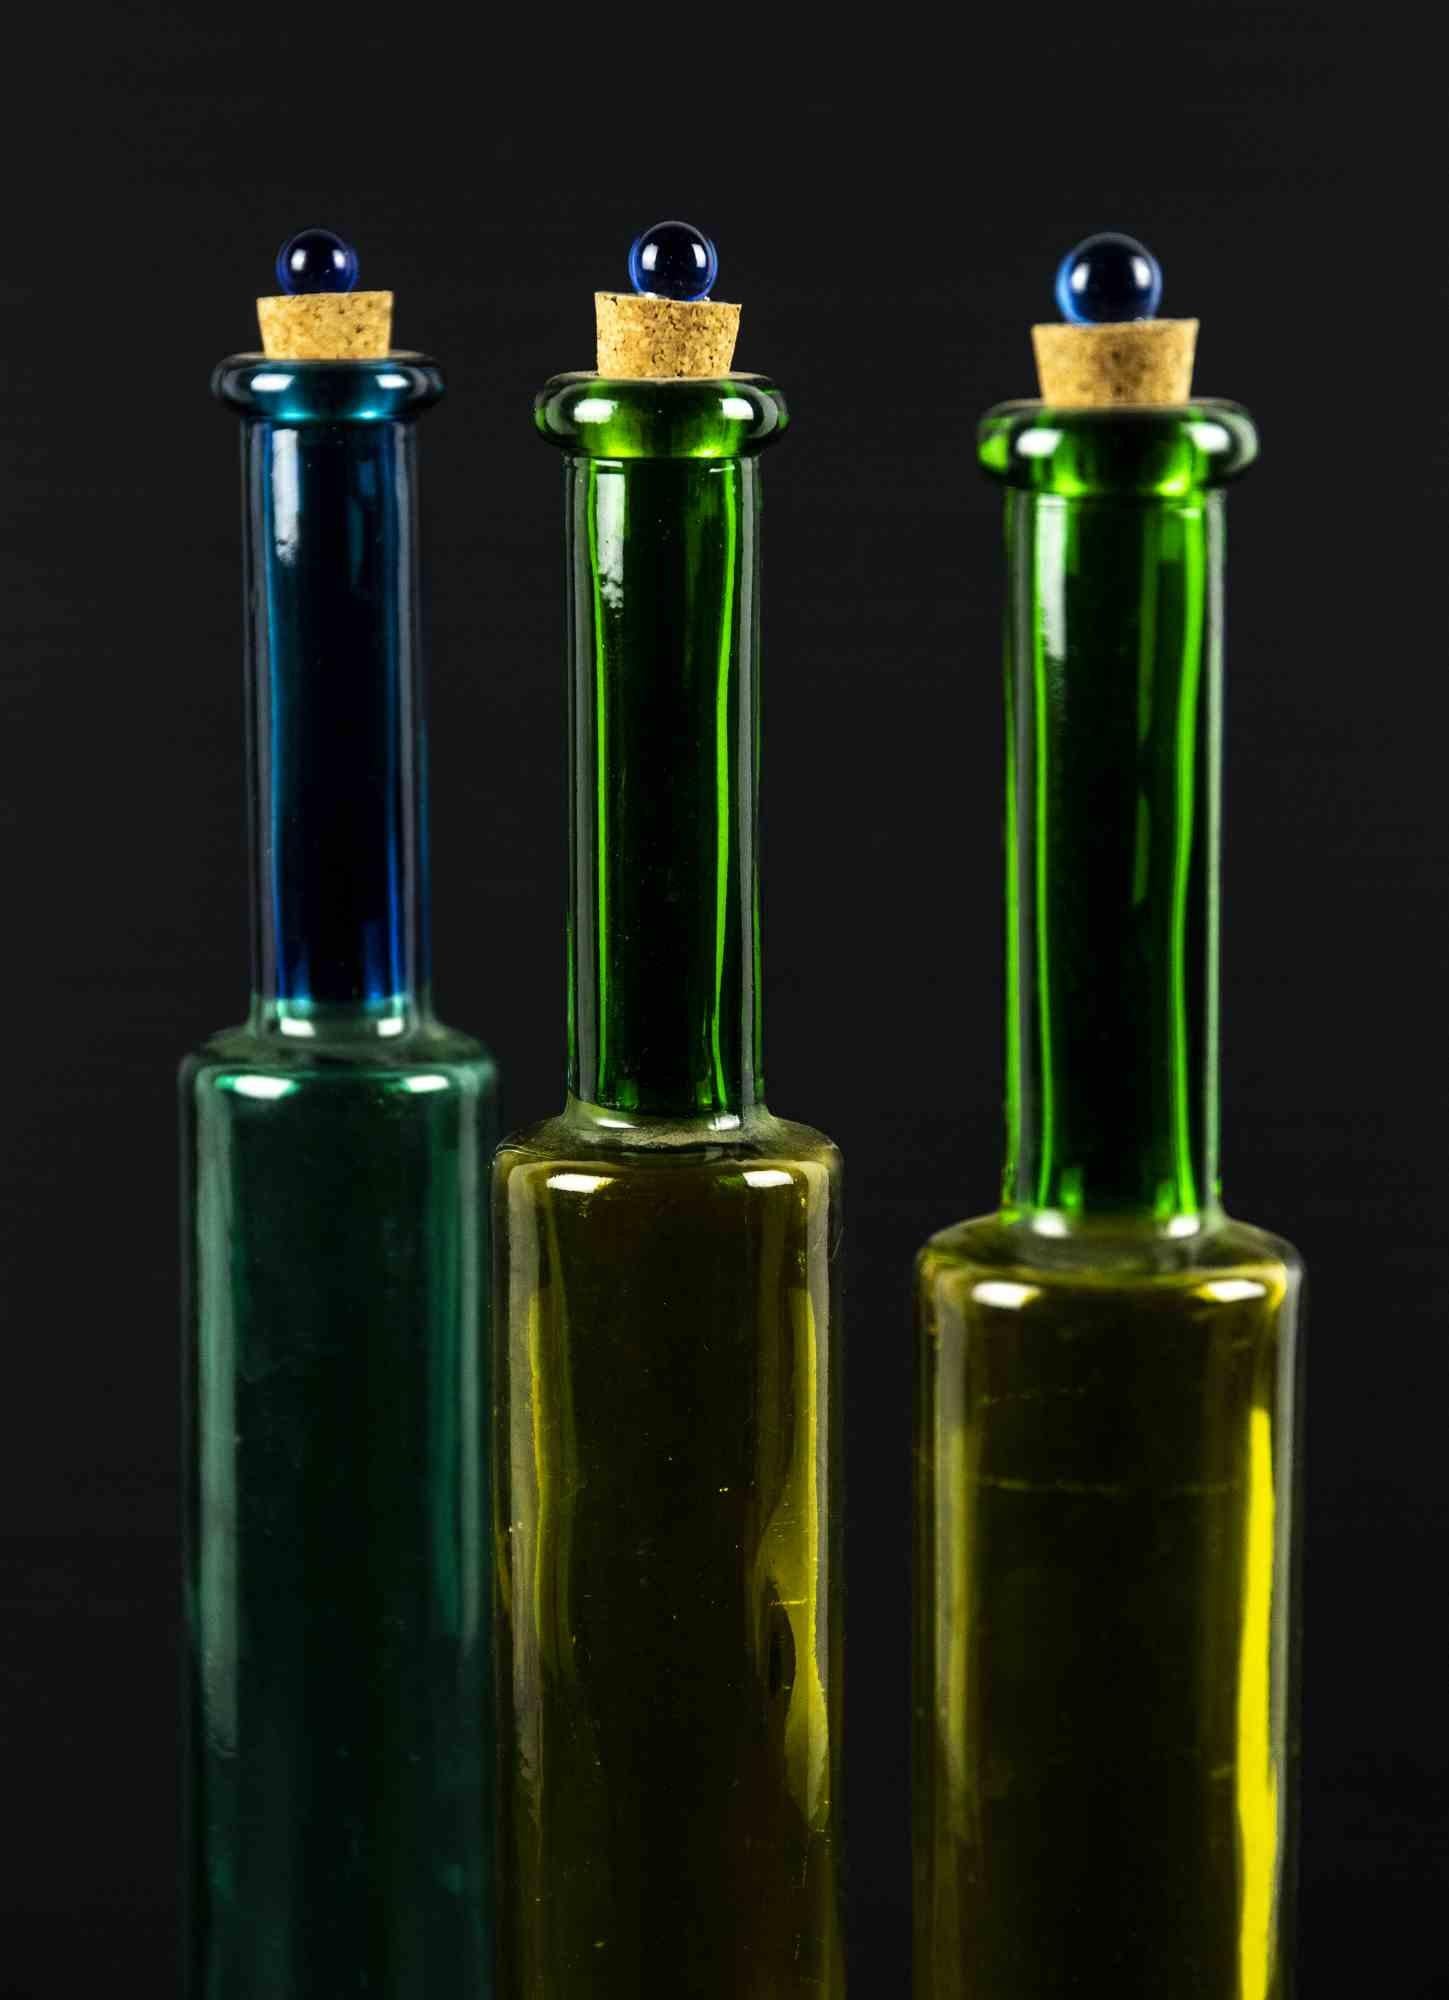 Vintage colored glass bottles is an original decorative object realized in the 1970s.

Original art glass.

Made in Italy.

Dimensions: 37 x 5 cm. 

Perfect conditions.